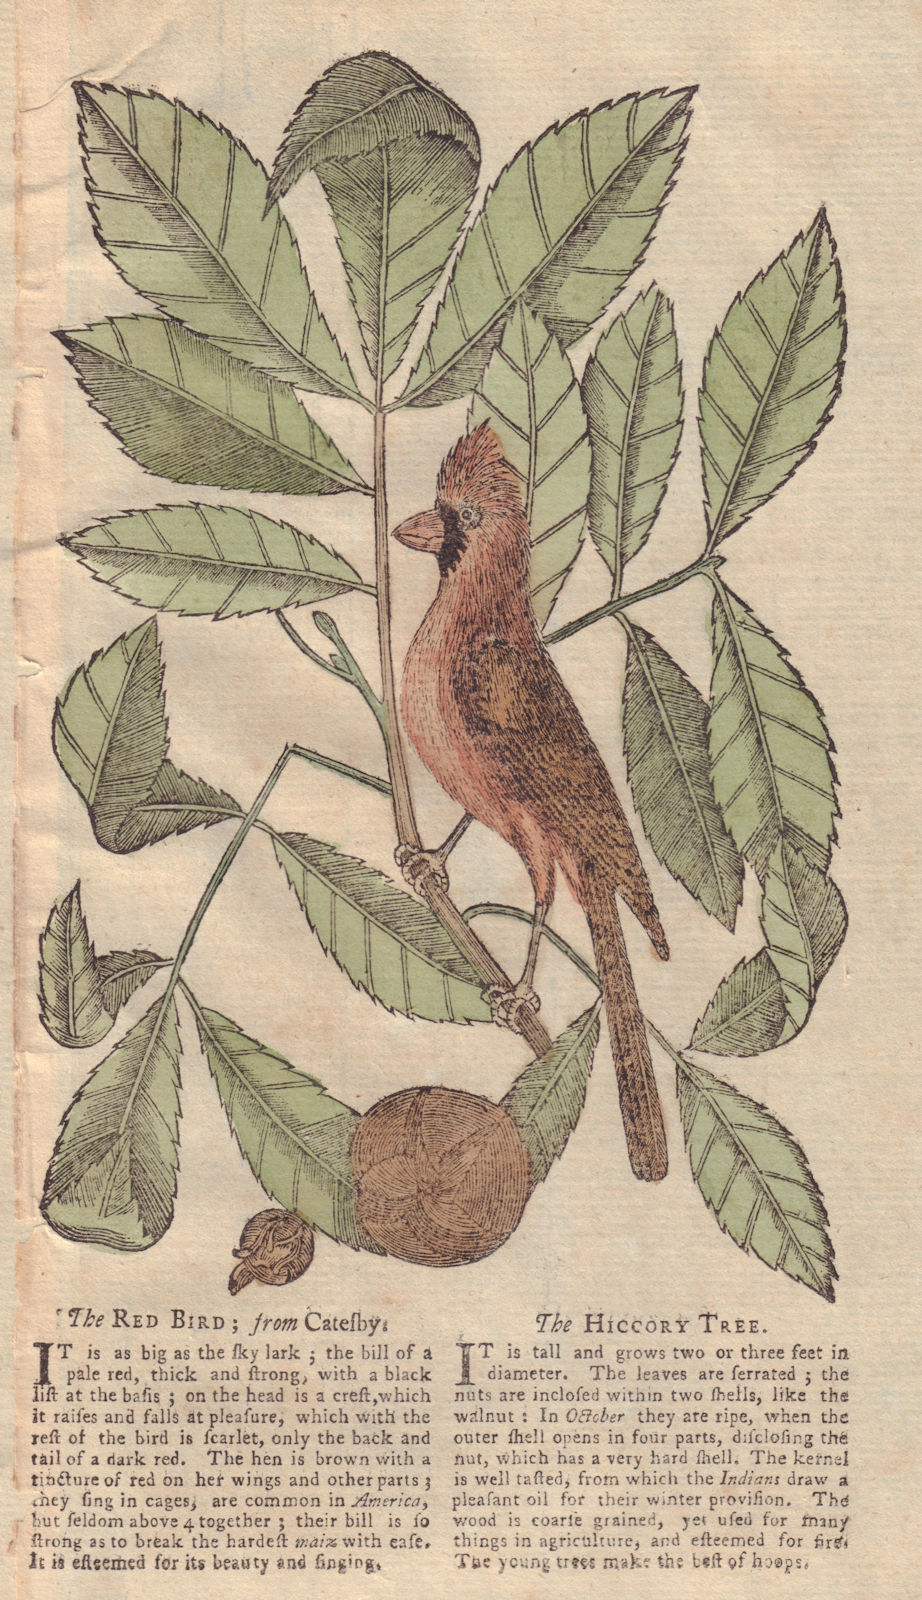 Associate Product The Red Bird & The Hiccory Tree. GENTS MAG 1753 old antique print picture